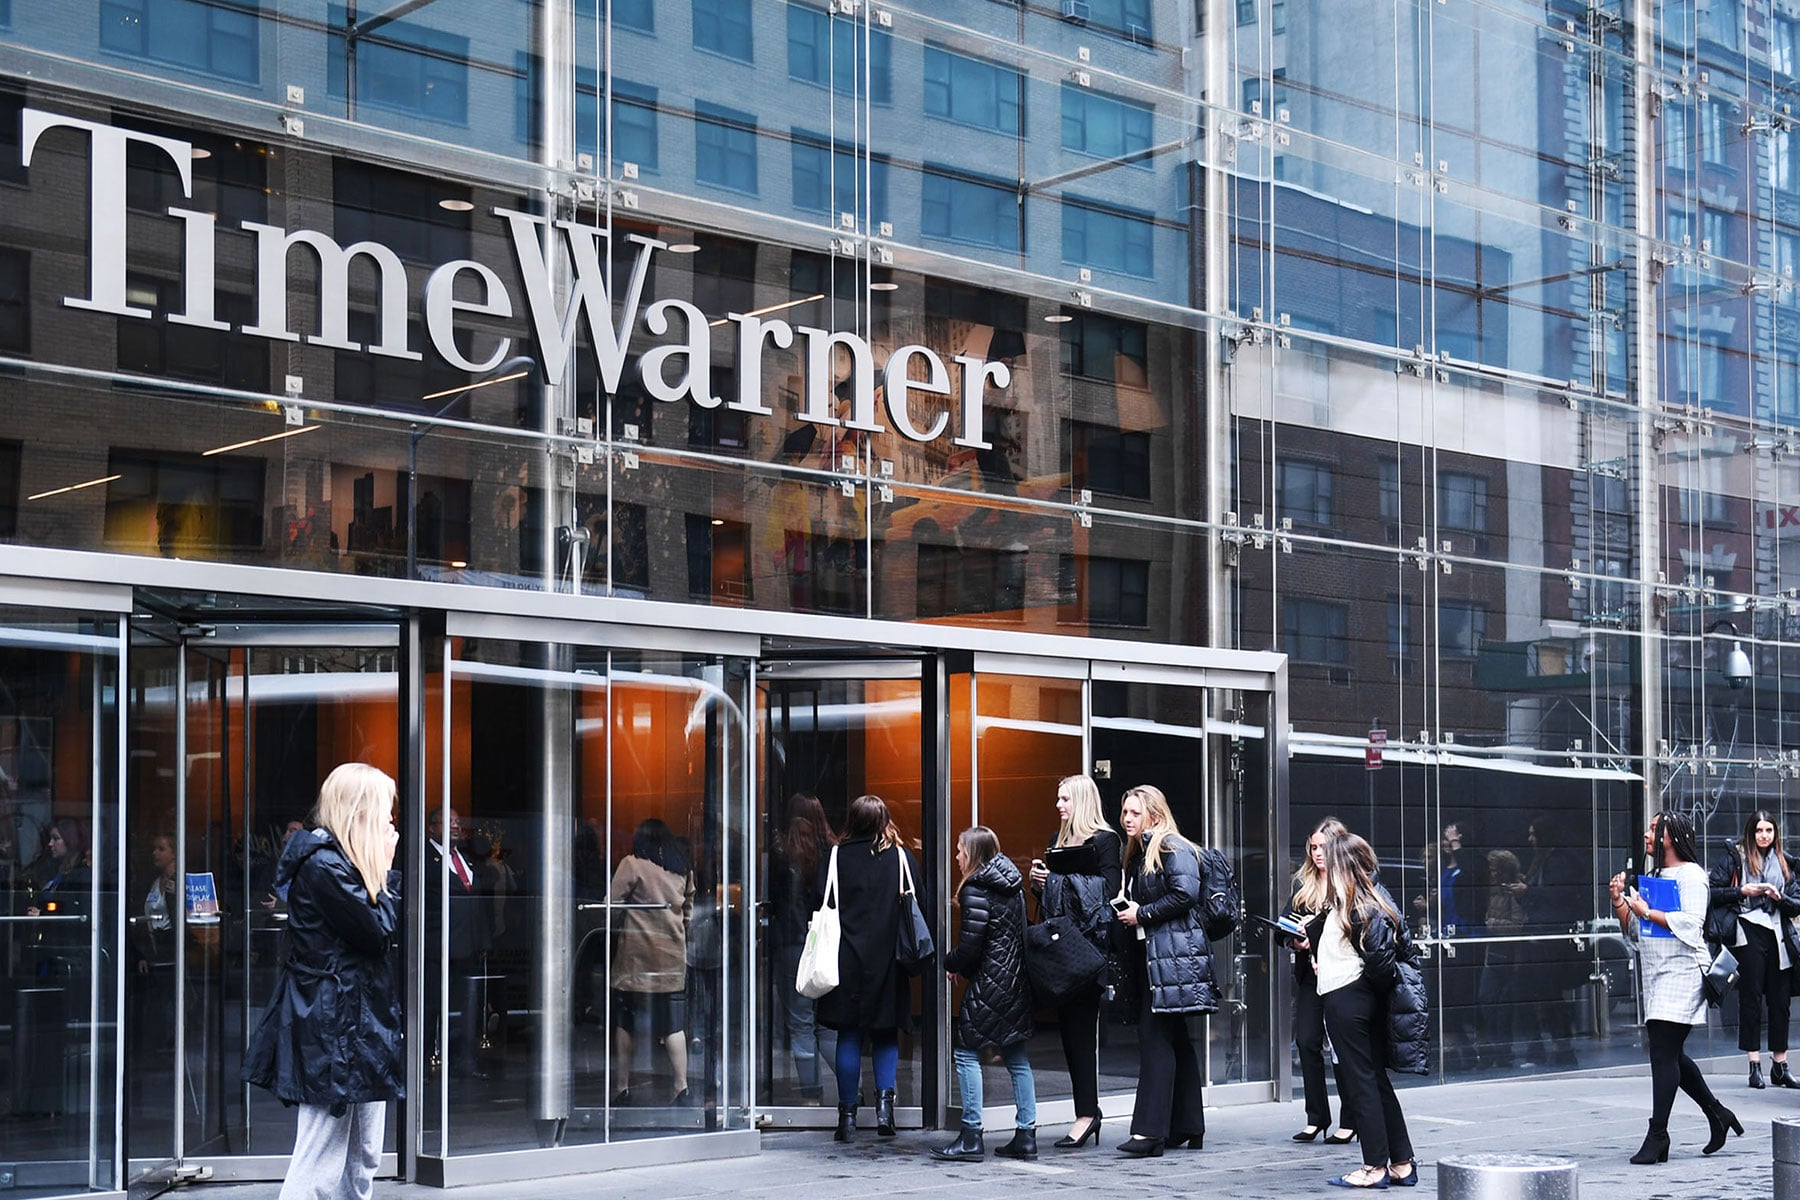 A number of young women dressed in winter clothes, file into an office building with the Time Warner logo above the door